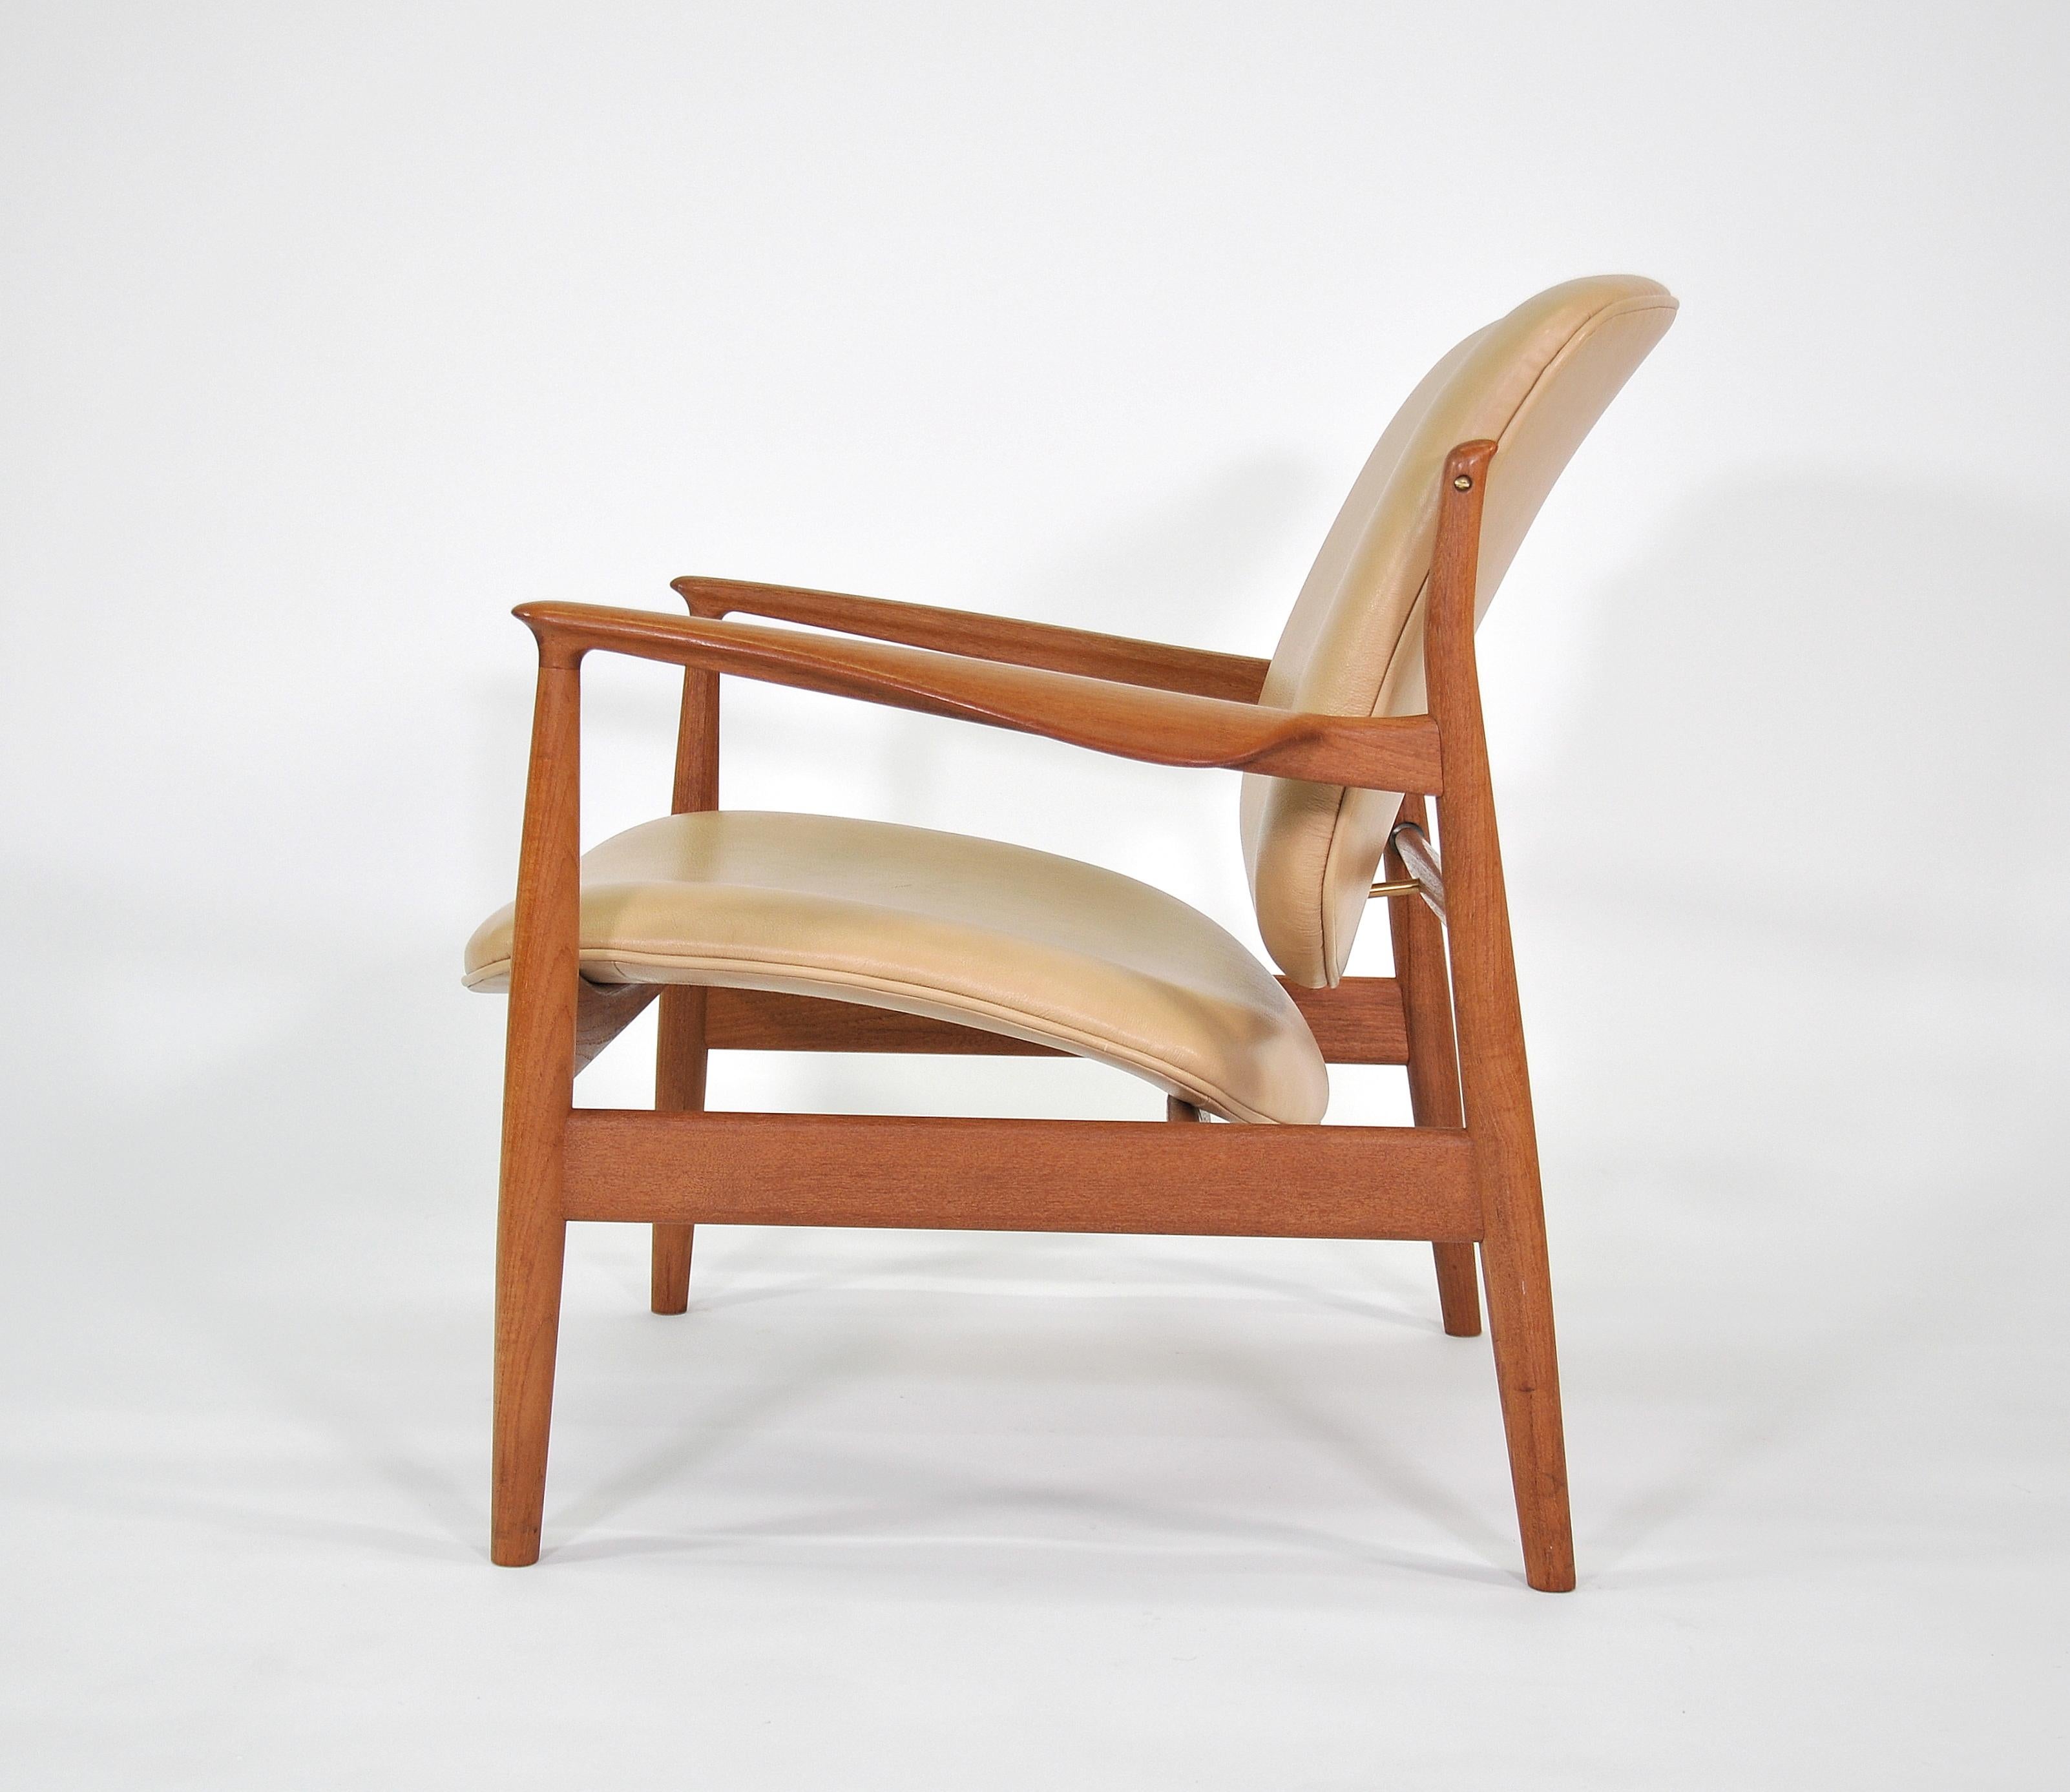 Iconic midcentury Danish modern FD136 vintage easy chair designed by Finn Juhl for France and Daverkosen (later renamed France and Son) dating from the 1950s, reupholstered in a light beige / caramel leather. The splendidly sculpted teak open frame